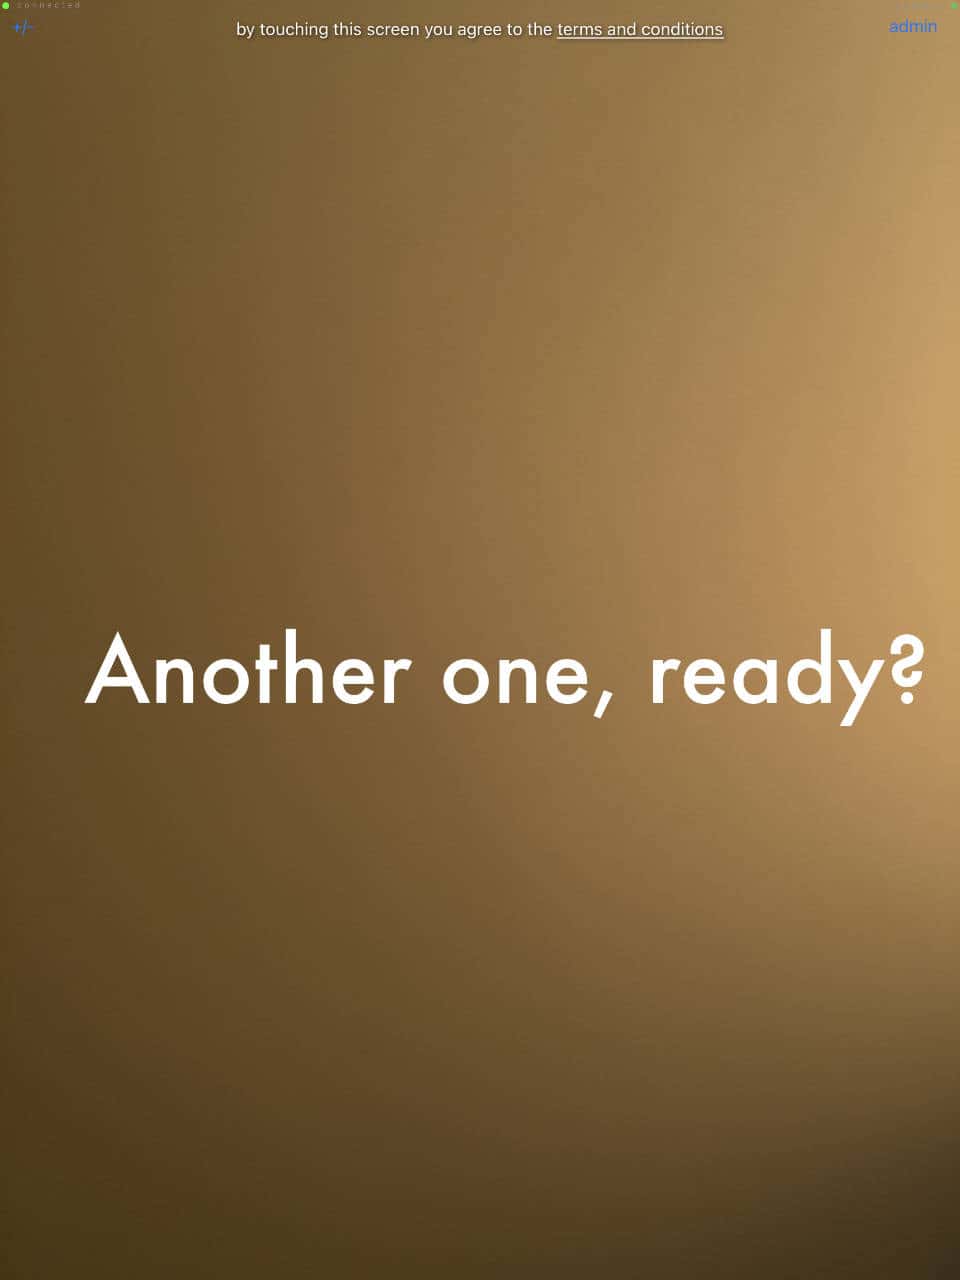 Screenshot of a message on a screen of the Gifyyy app, saying 'another, ready?'